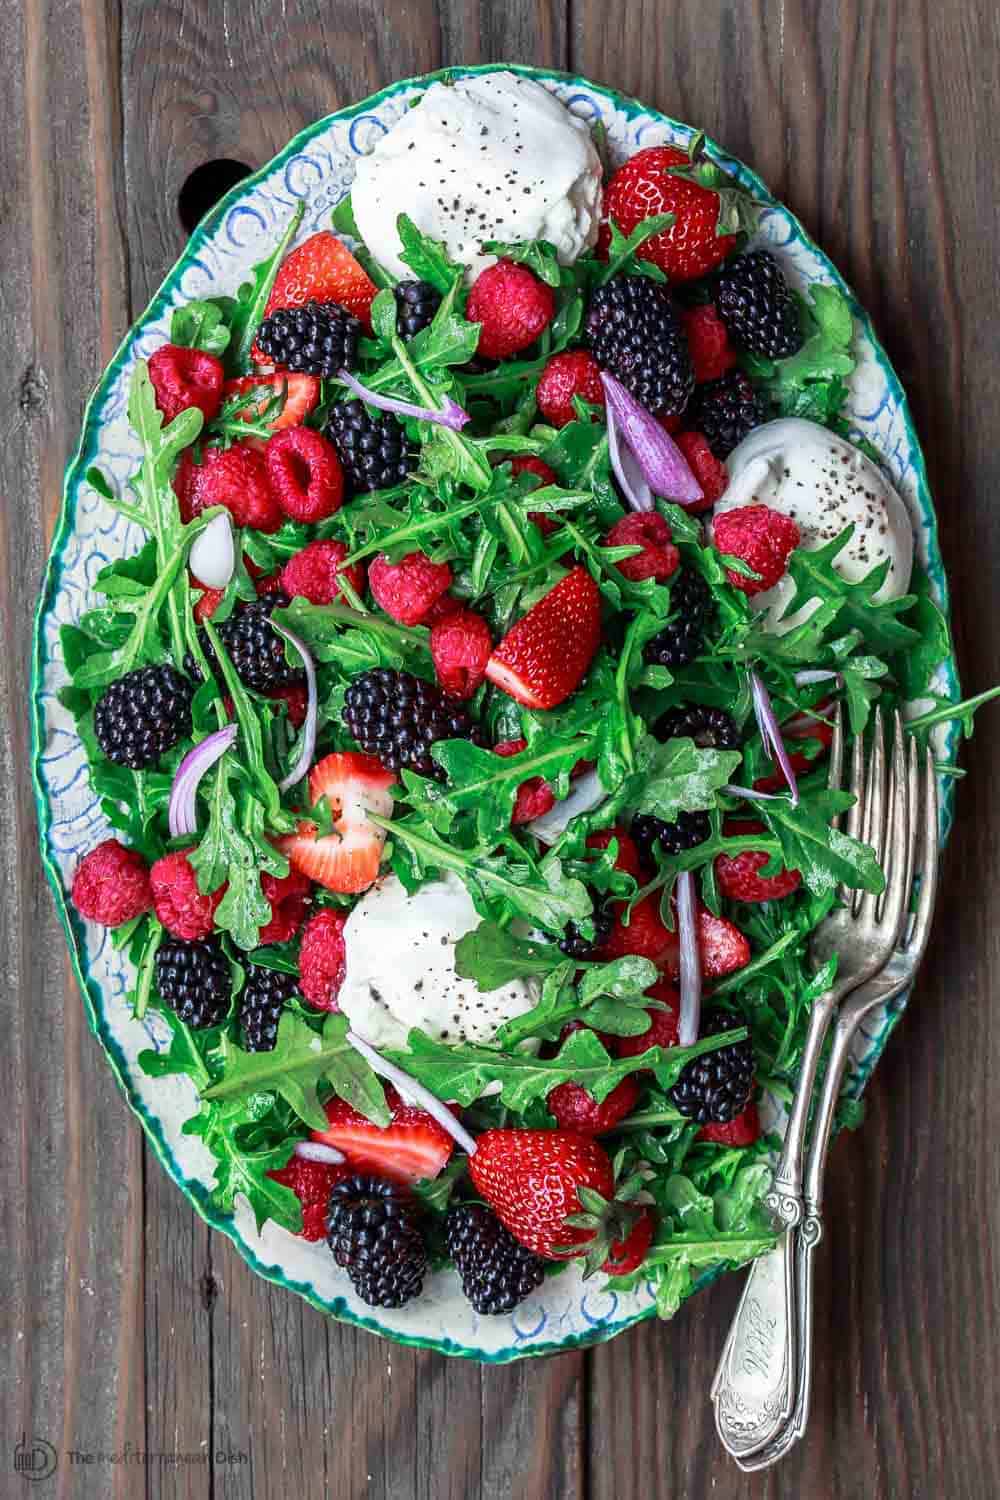 Arugula salad with burrata cheese, raspberries, strawberries and blackberries served in a large plate